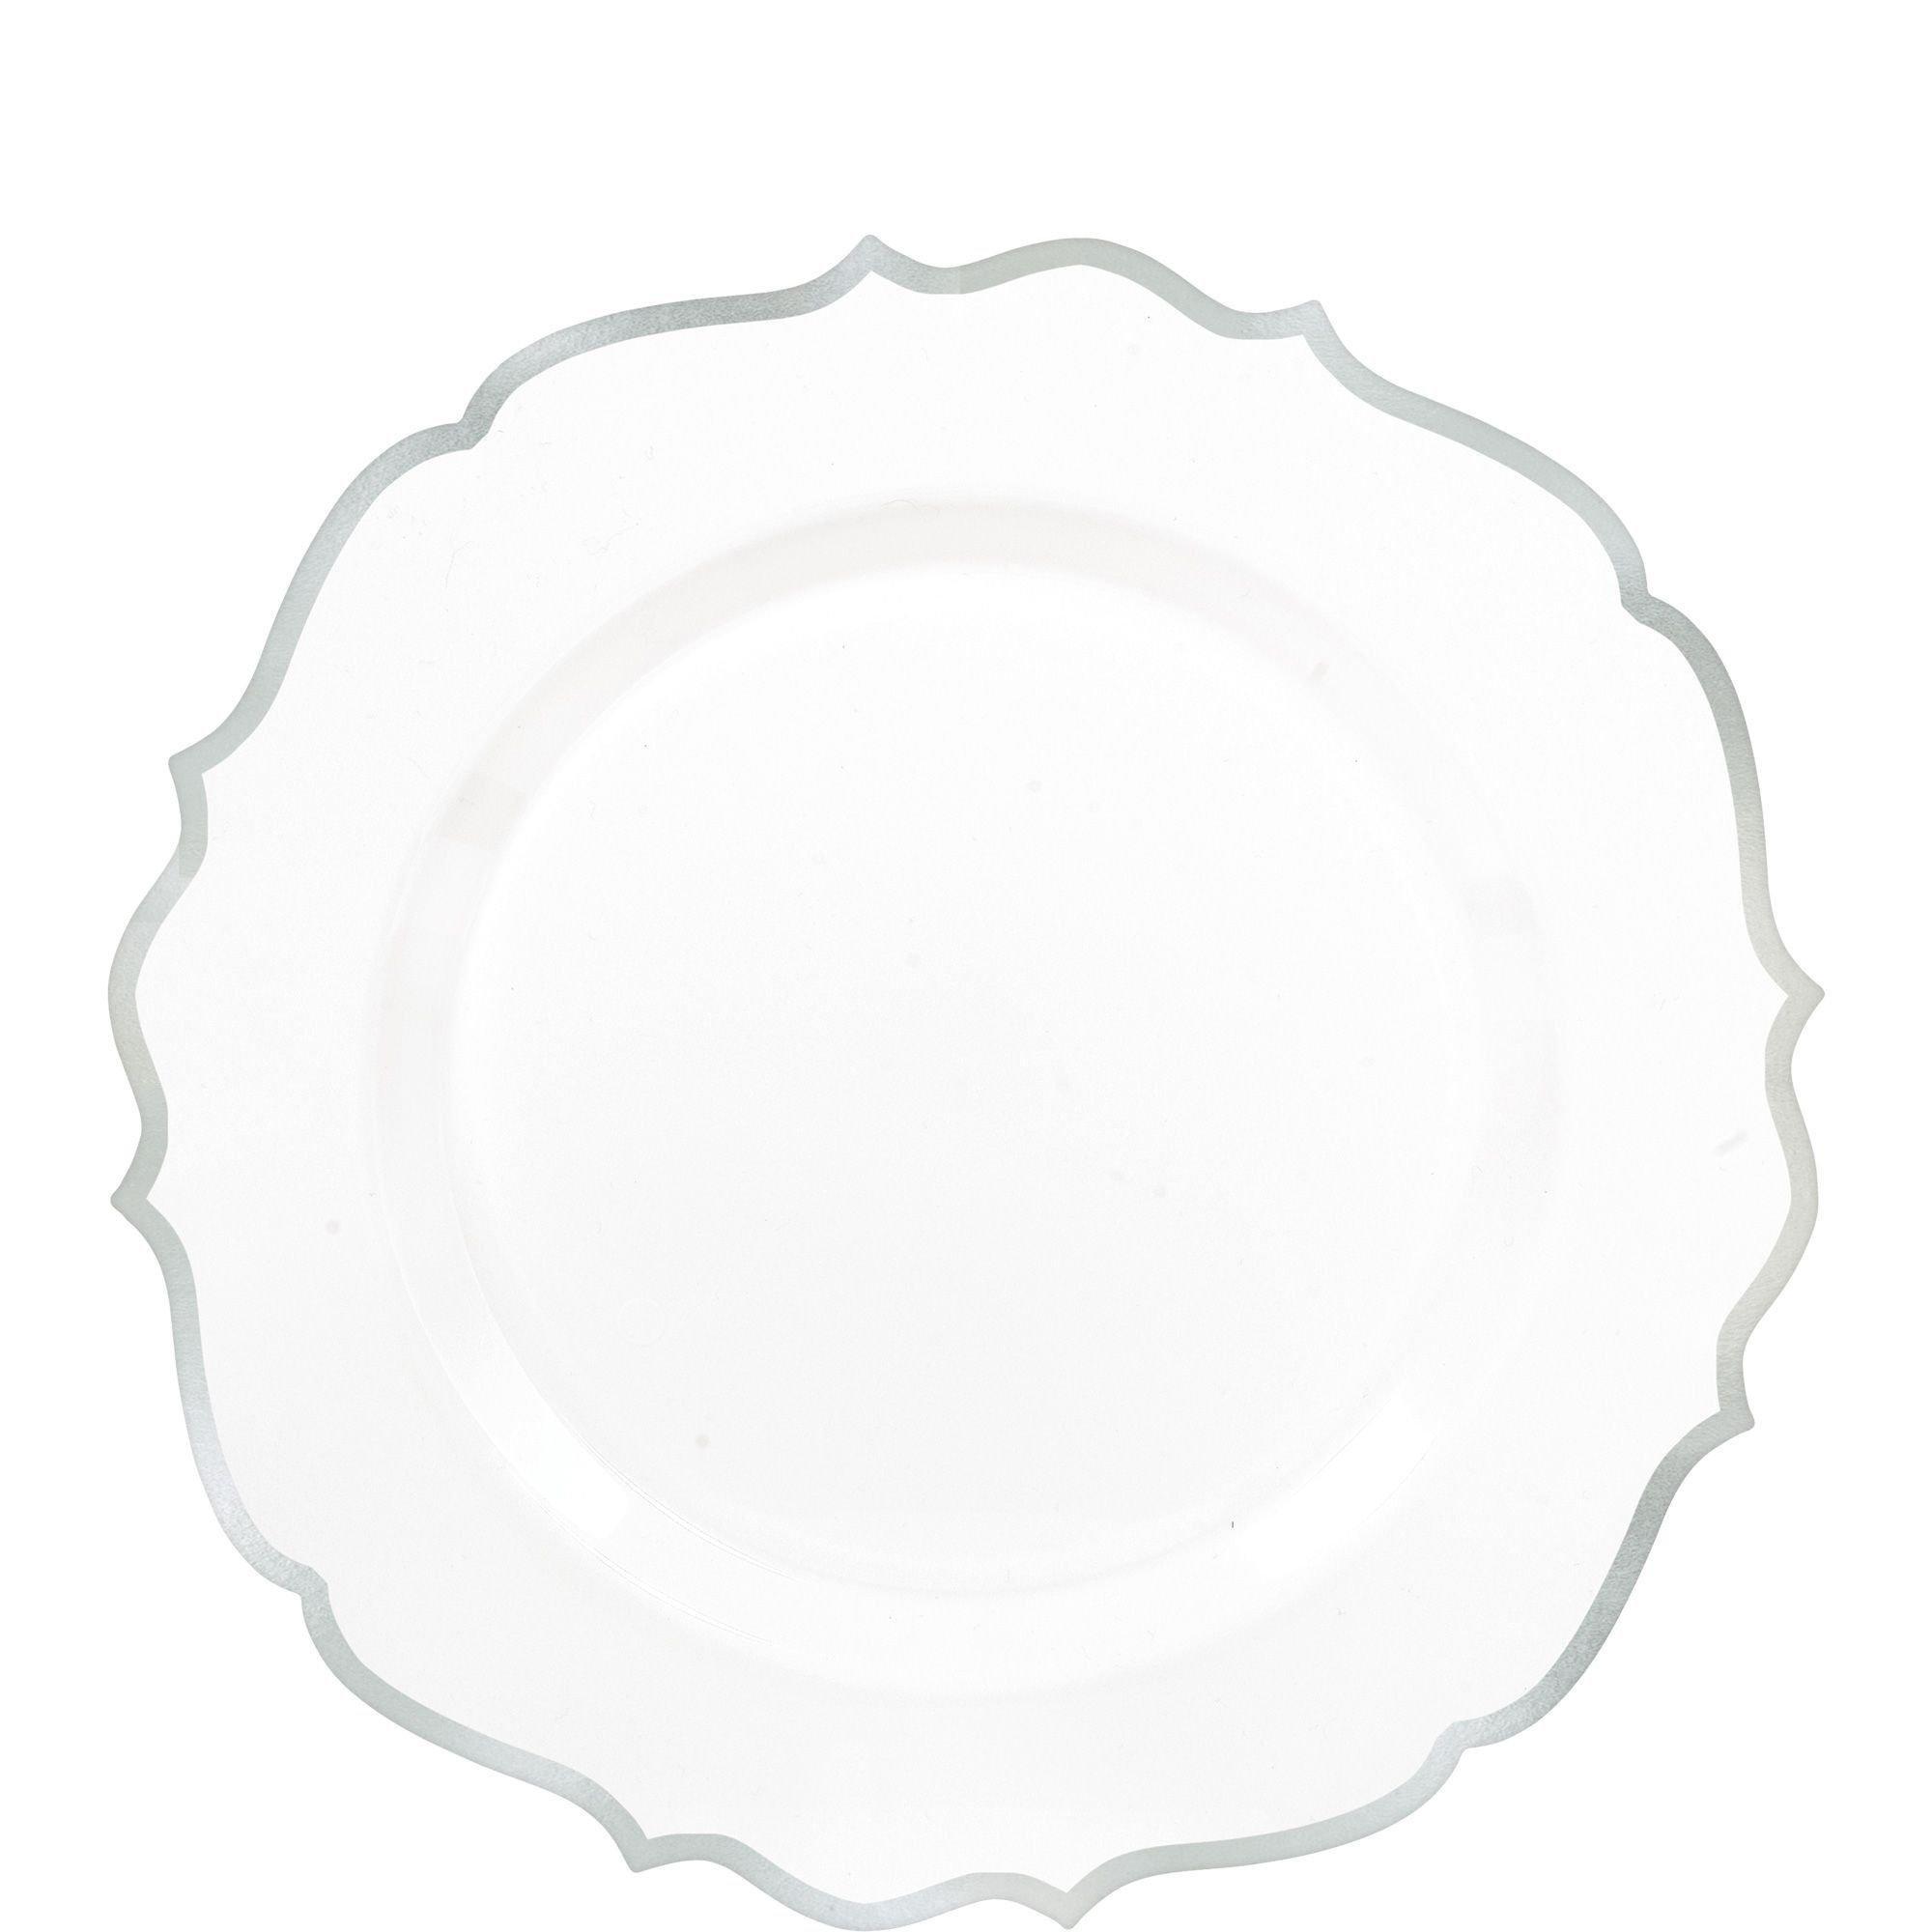 White & Silver Ornate Premium Tableware Kit for 40 Guests